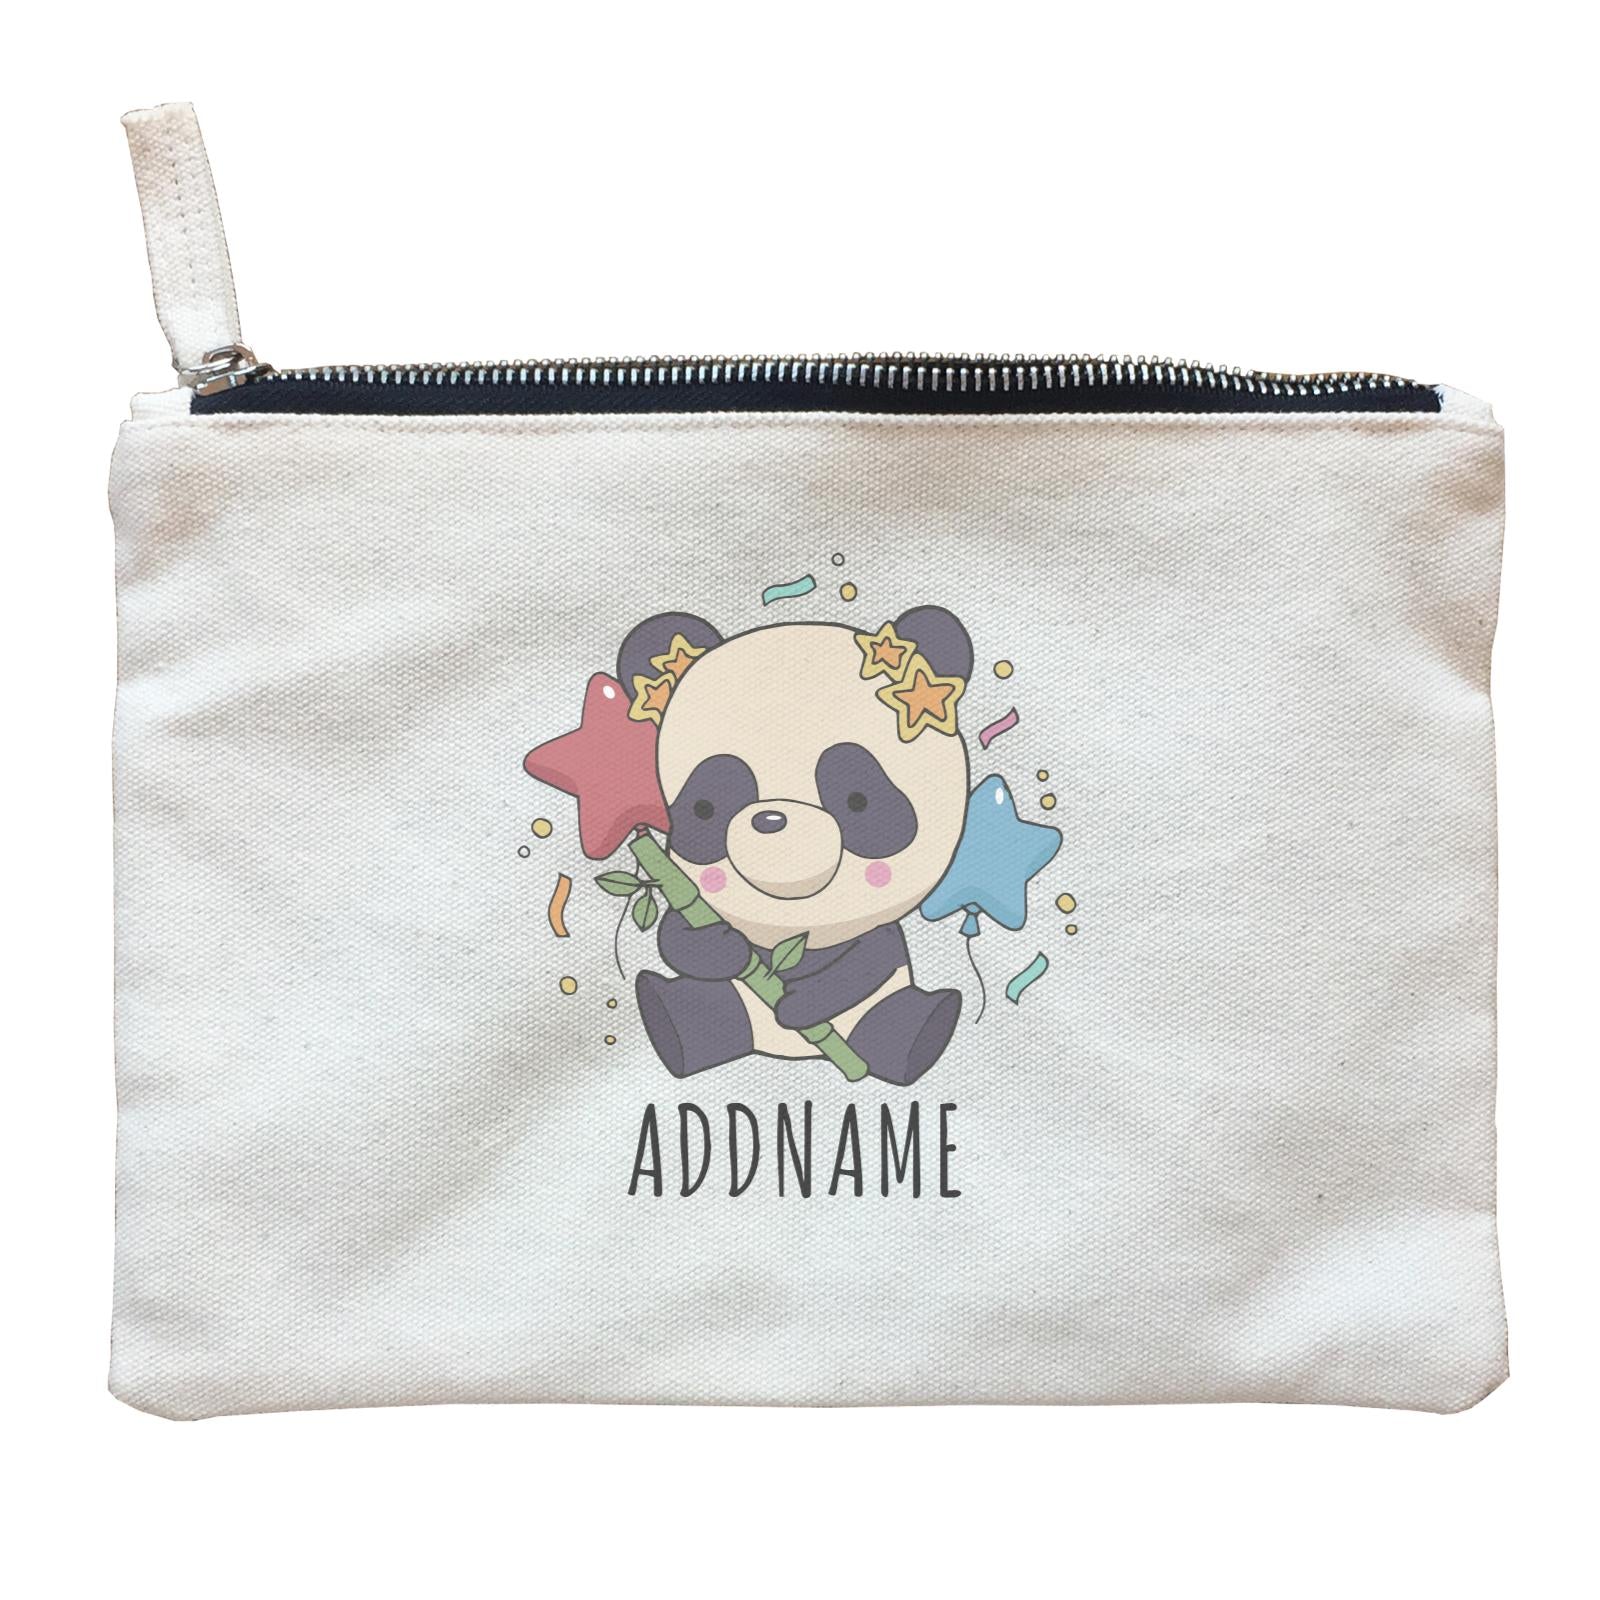 Birthday Sketch Animals Panda with Party Hat Holding Bamboo Addname Zipper Pouch